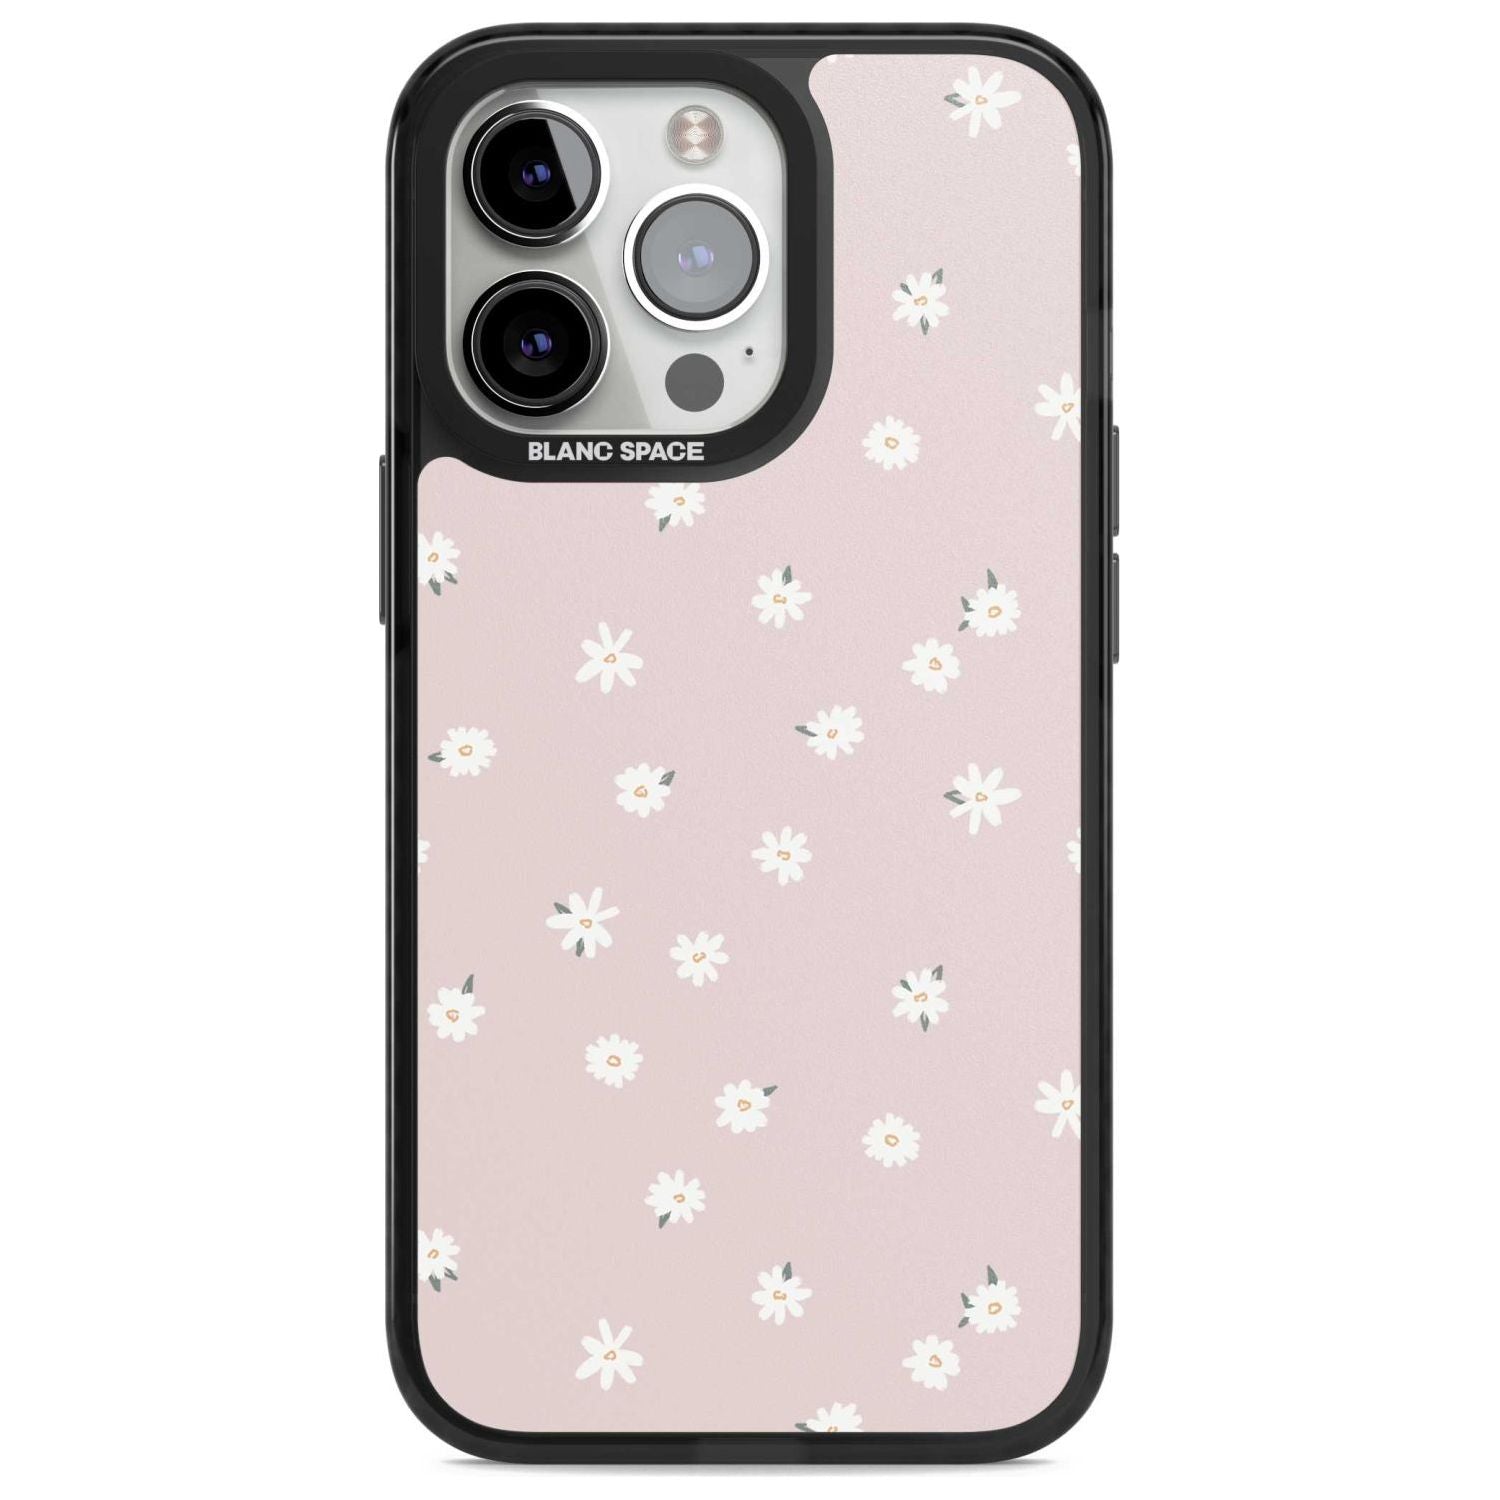 Painted Daises on Pink Phone Case iPhone 15 Pro Max / Magsafe Black Impact Case,iPhone 15 Pro / Magsafe Black Impact Case,iPhone 14 Pro Max / Magsafe Black Impact Case,iPhone 14 Pro / Magsafe Black Impact Case,iPhone 13 Pro / Magsafe Black Impact Case Blanc Space